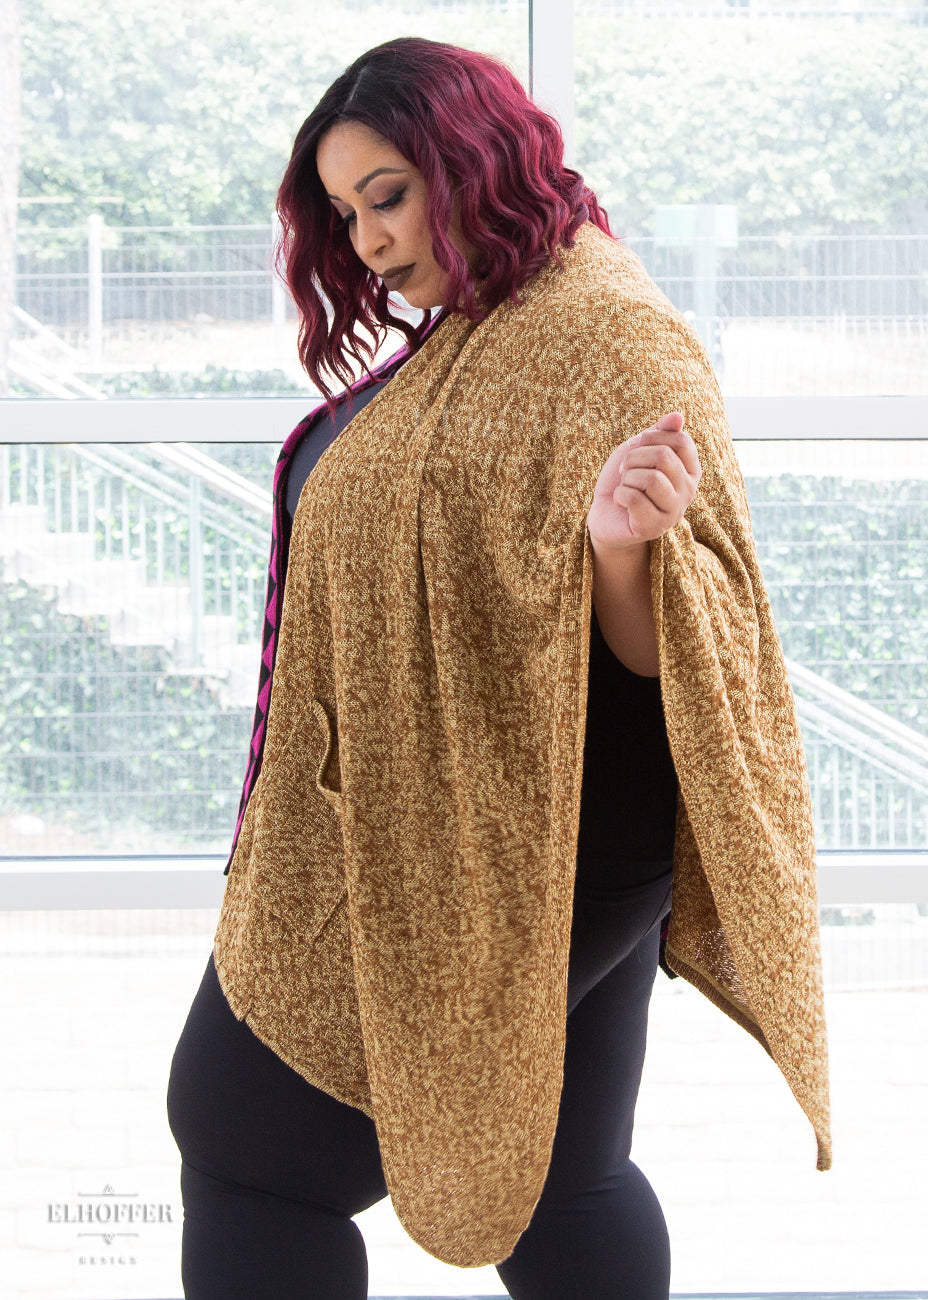 Dawn stands showing the left side of the poncho, a blend of golden and brown tones of yarn and a pocket.